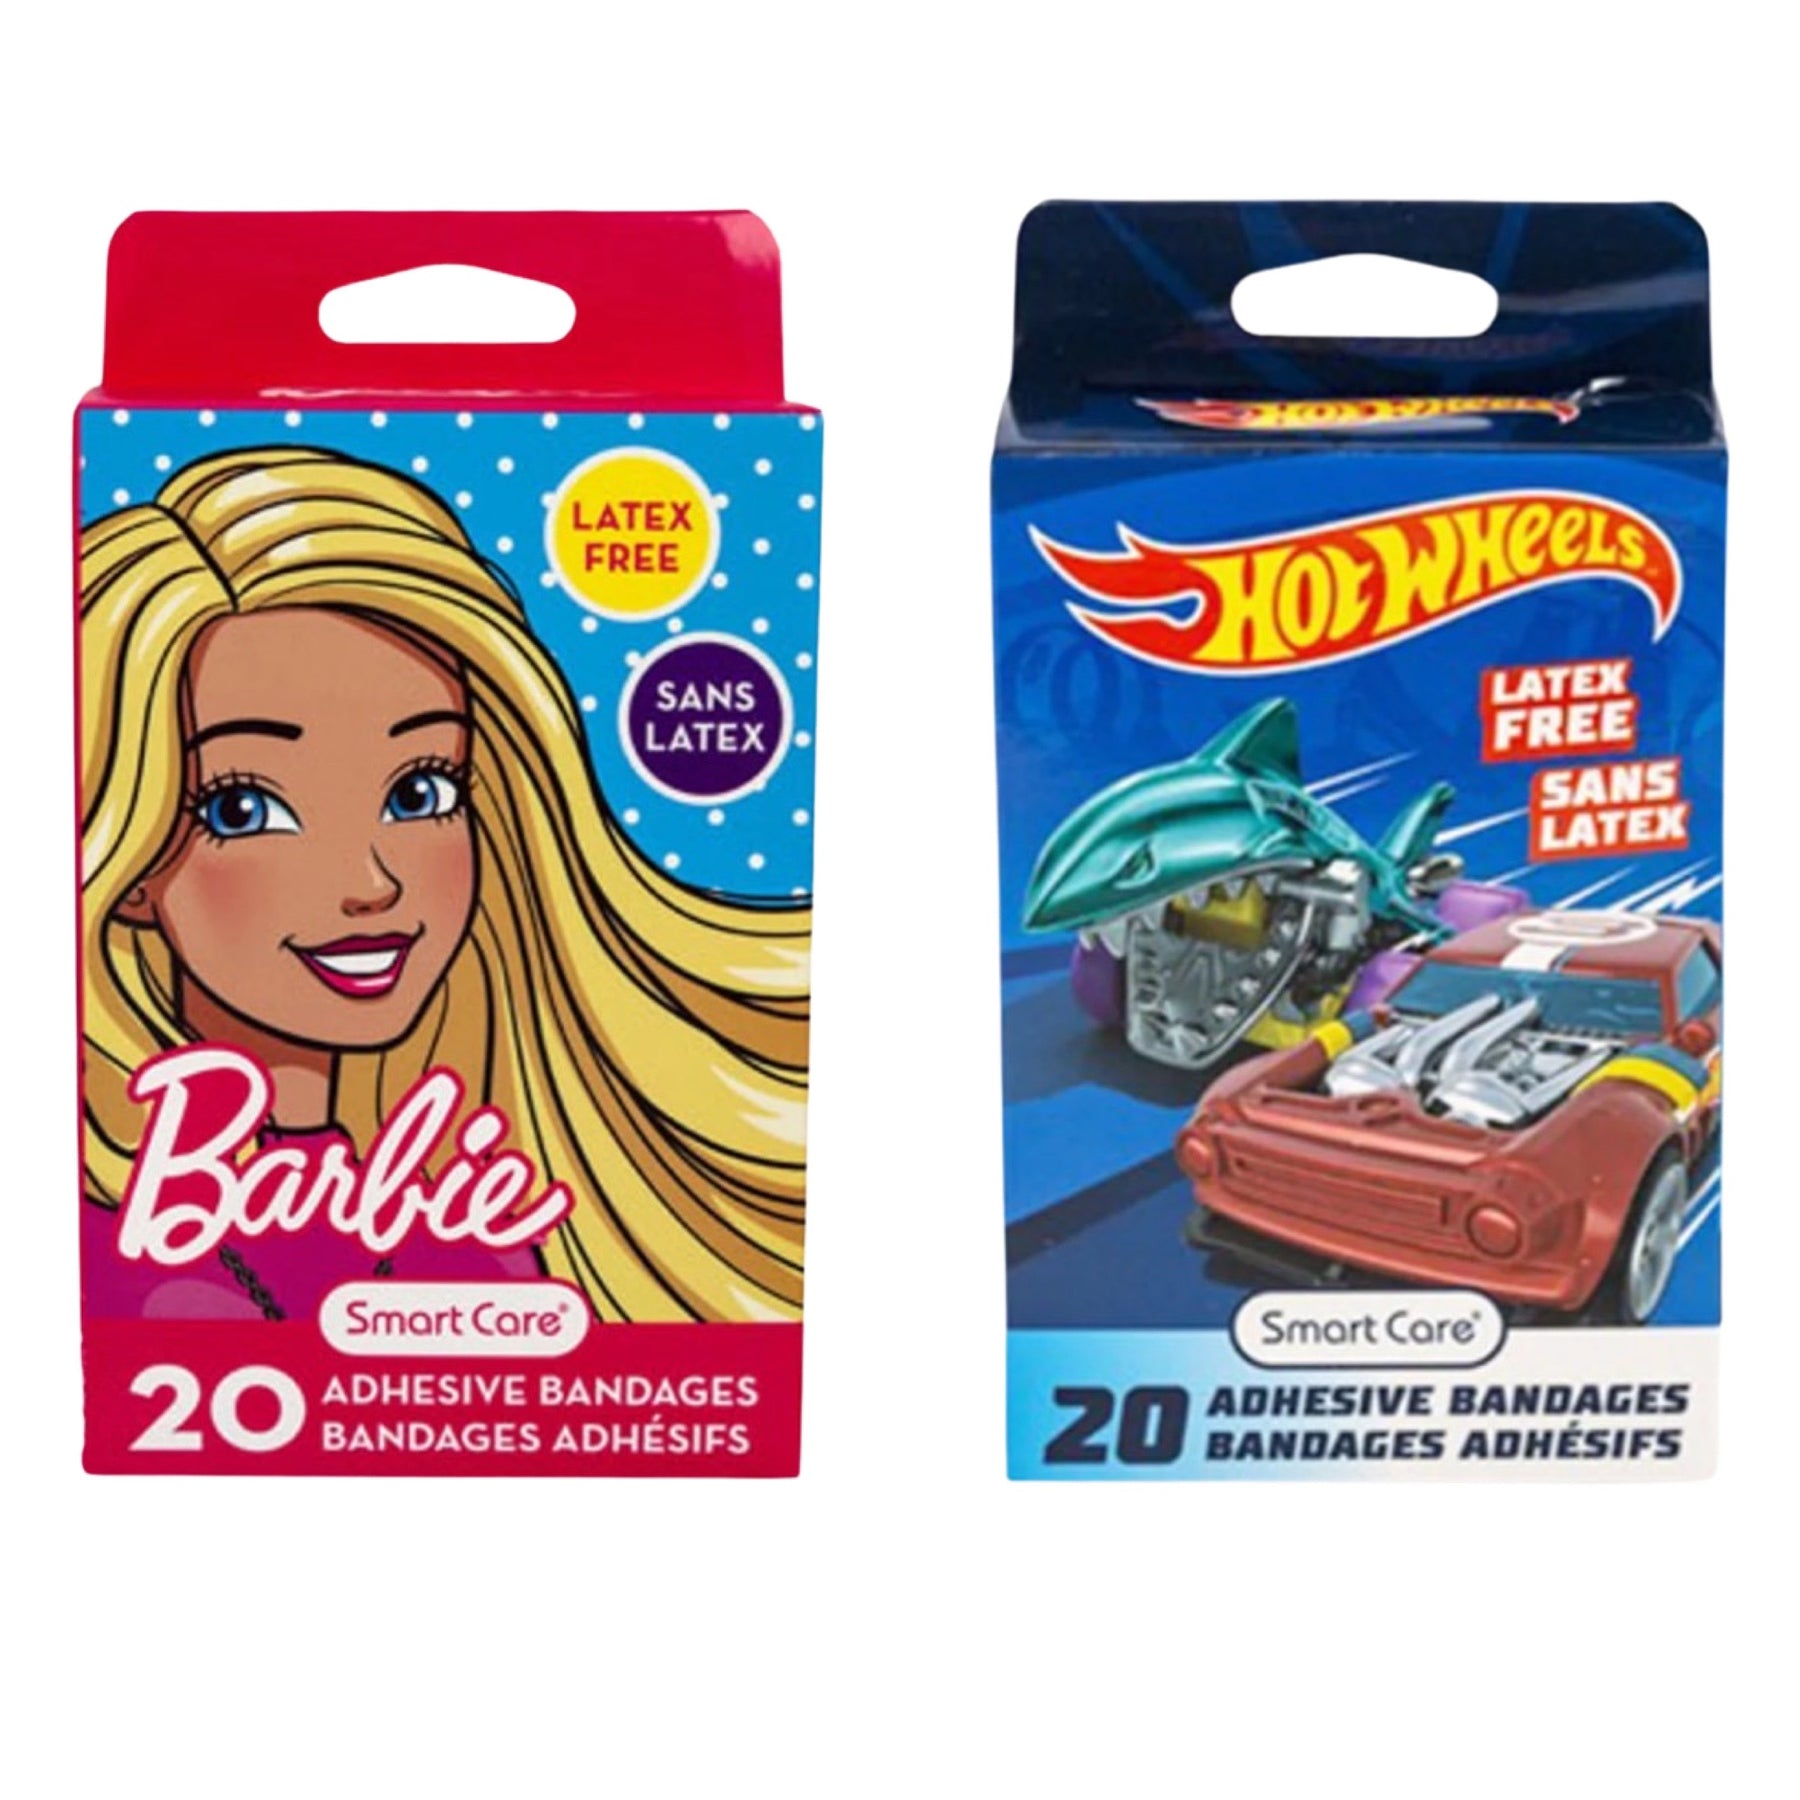 20 Kids Latex Free Adhesive Band-Aids - Hot Wheels & Barbie Bandages For Boo-Boo's